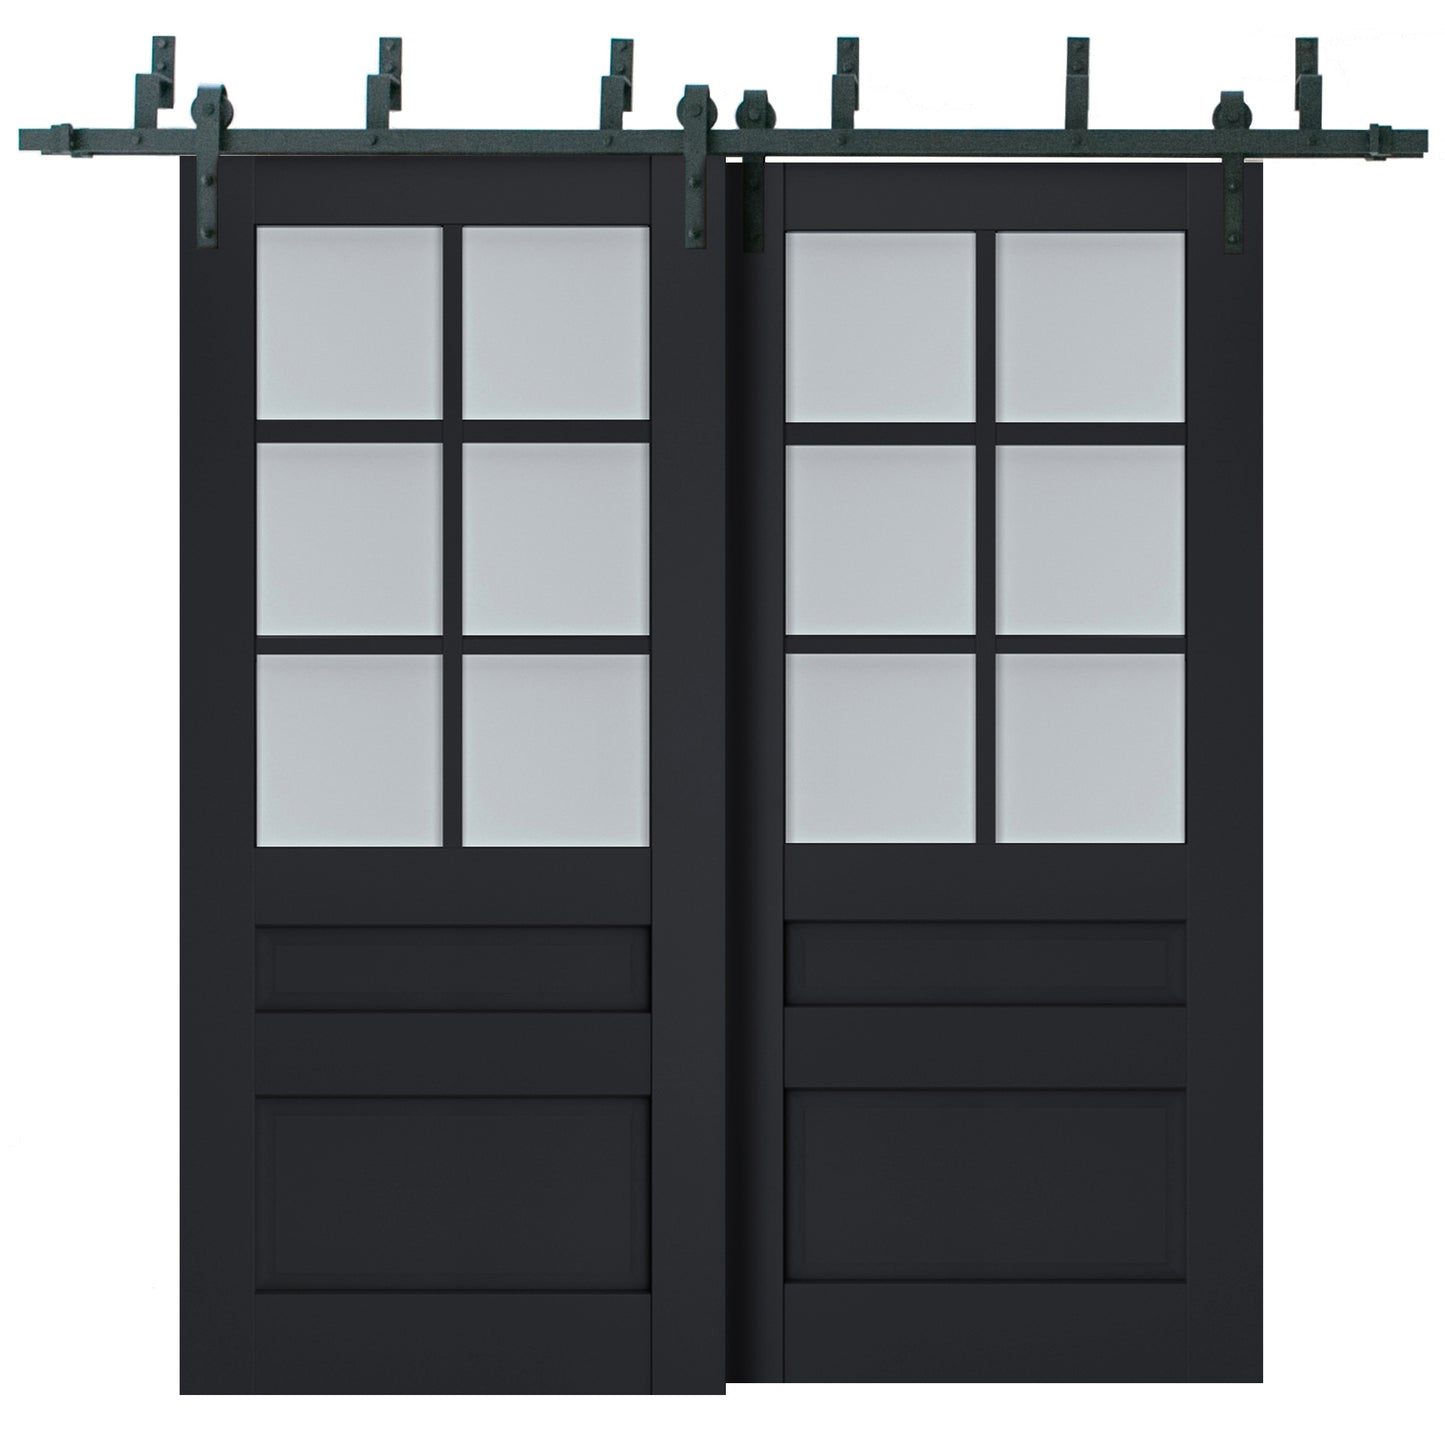 Veregio 7339 Antracite Double Barn Door with Frosted Glass and Black Bypass Rail